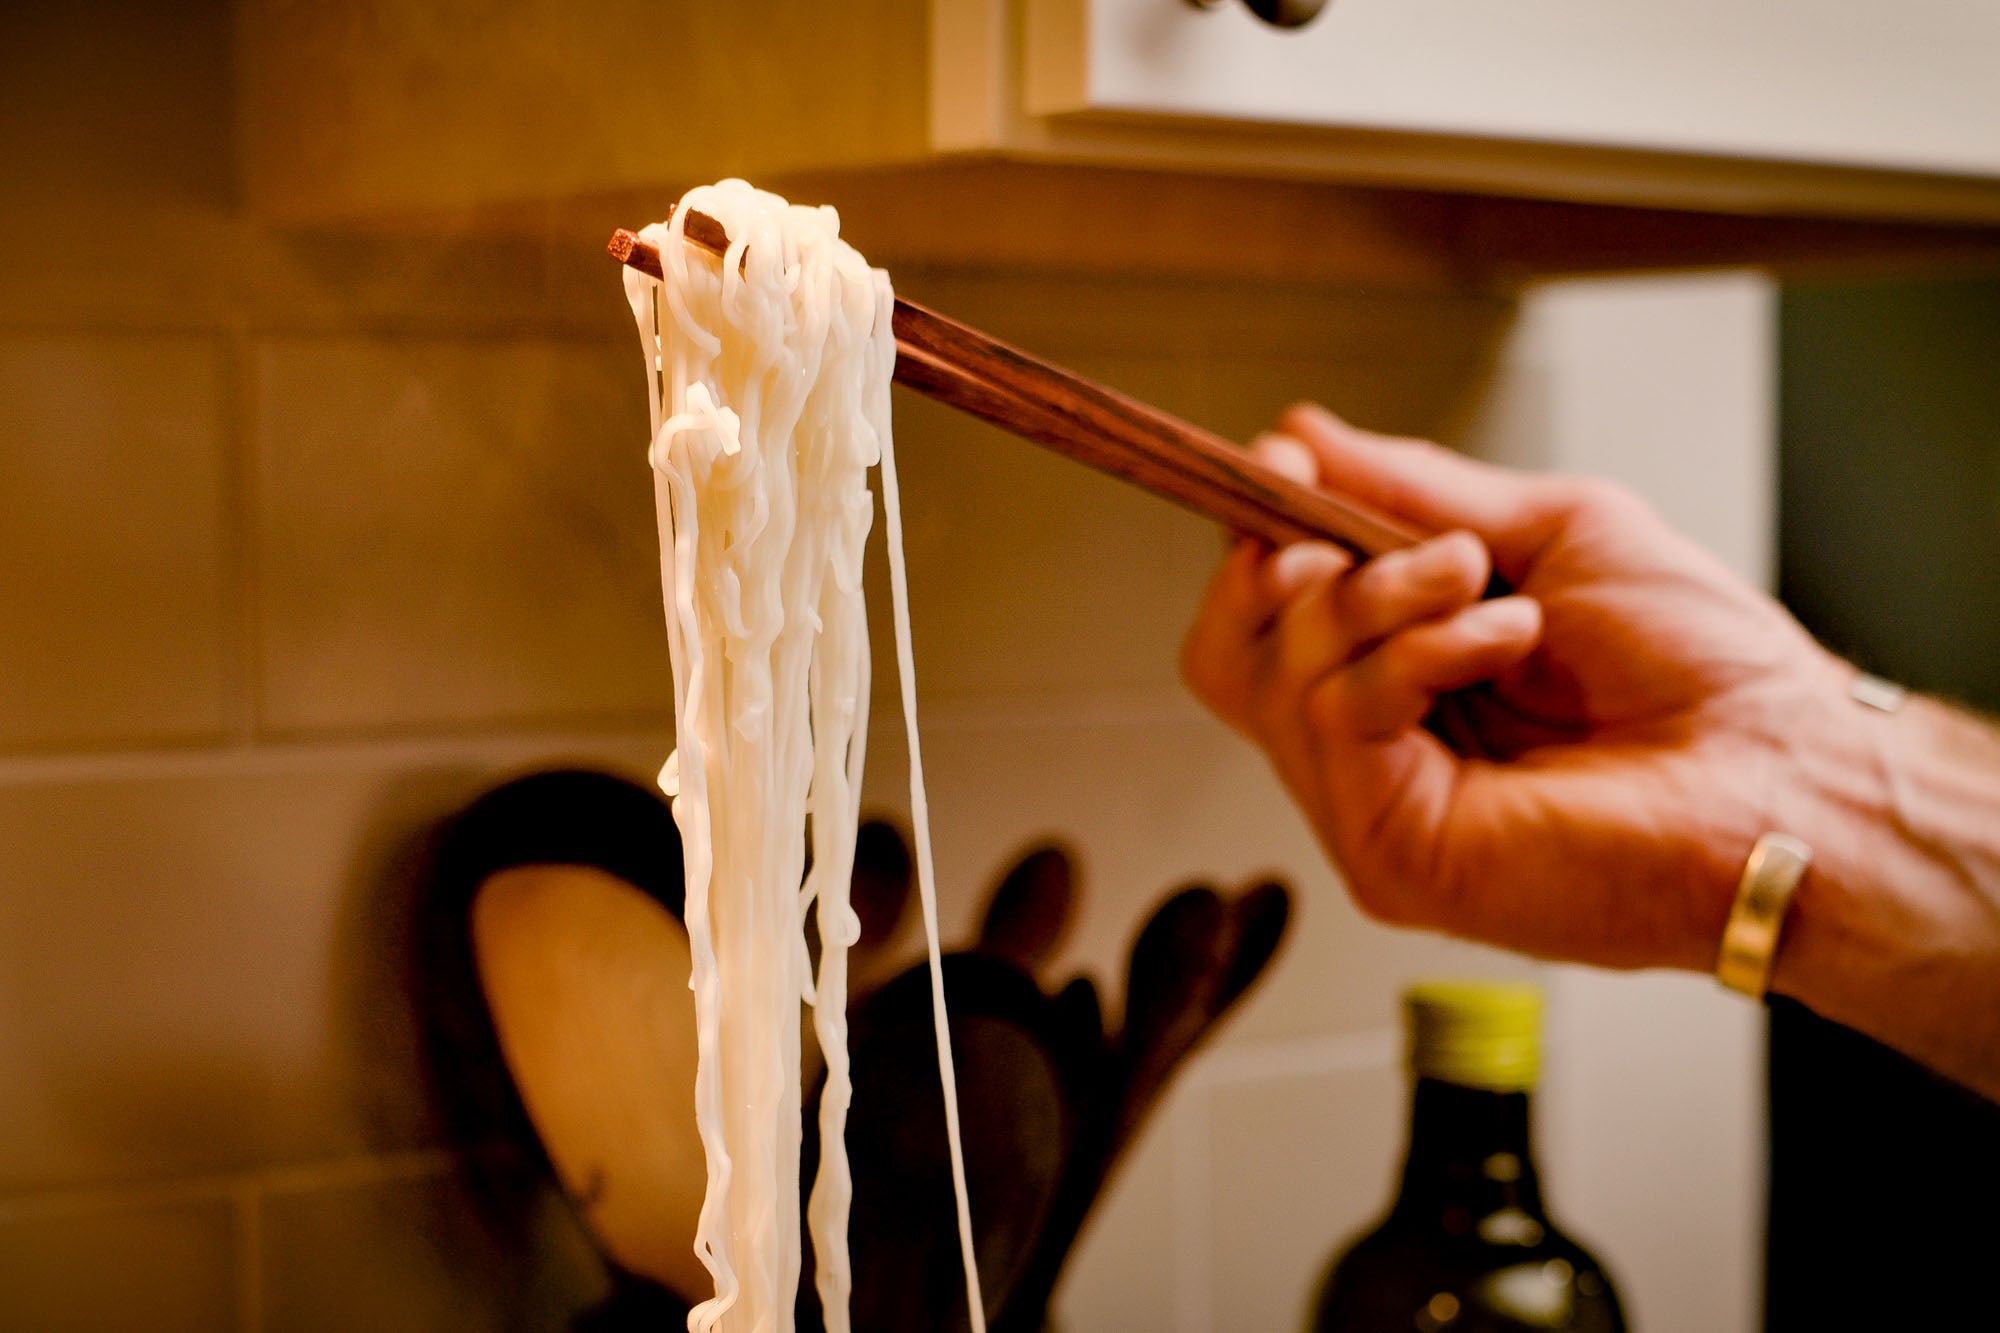 Chopsticks Rules: 18 Things Not to Do with Chopsticks